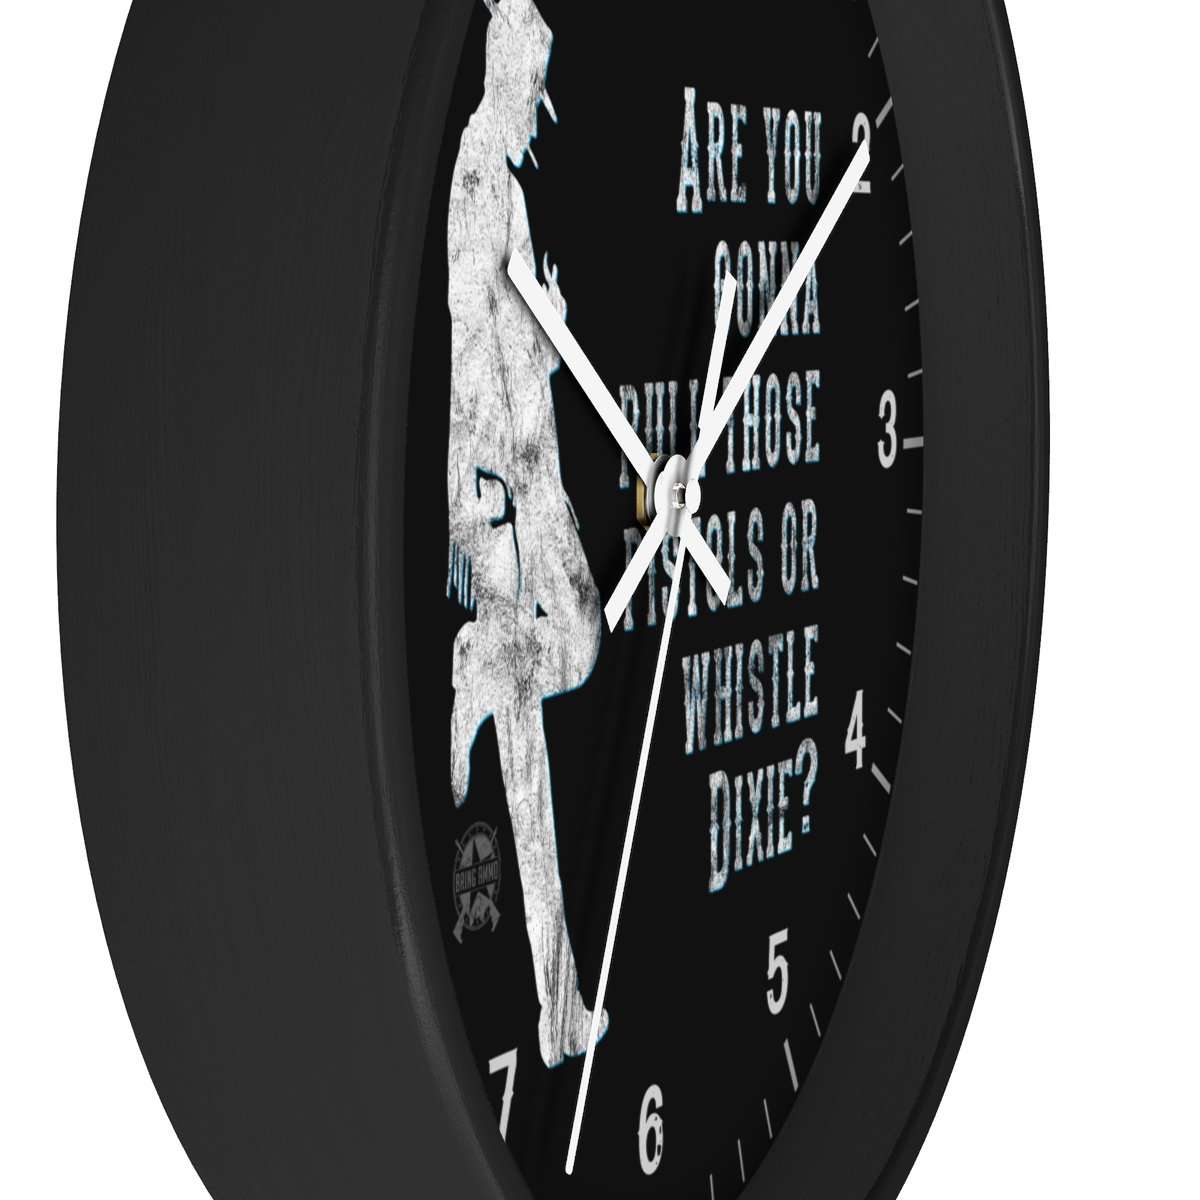 Are you gonna pull those pistols or whistle Dixie? Wooden Wall Clock Home Decor 